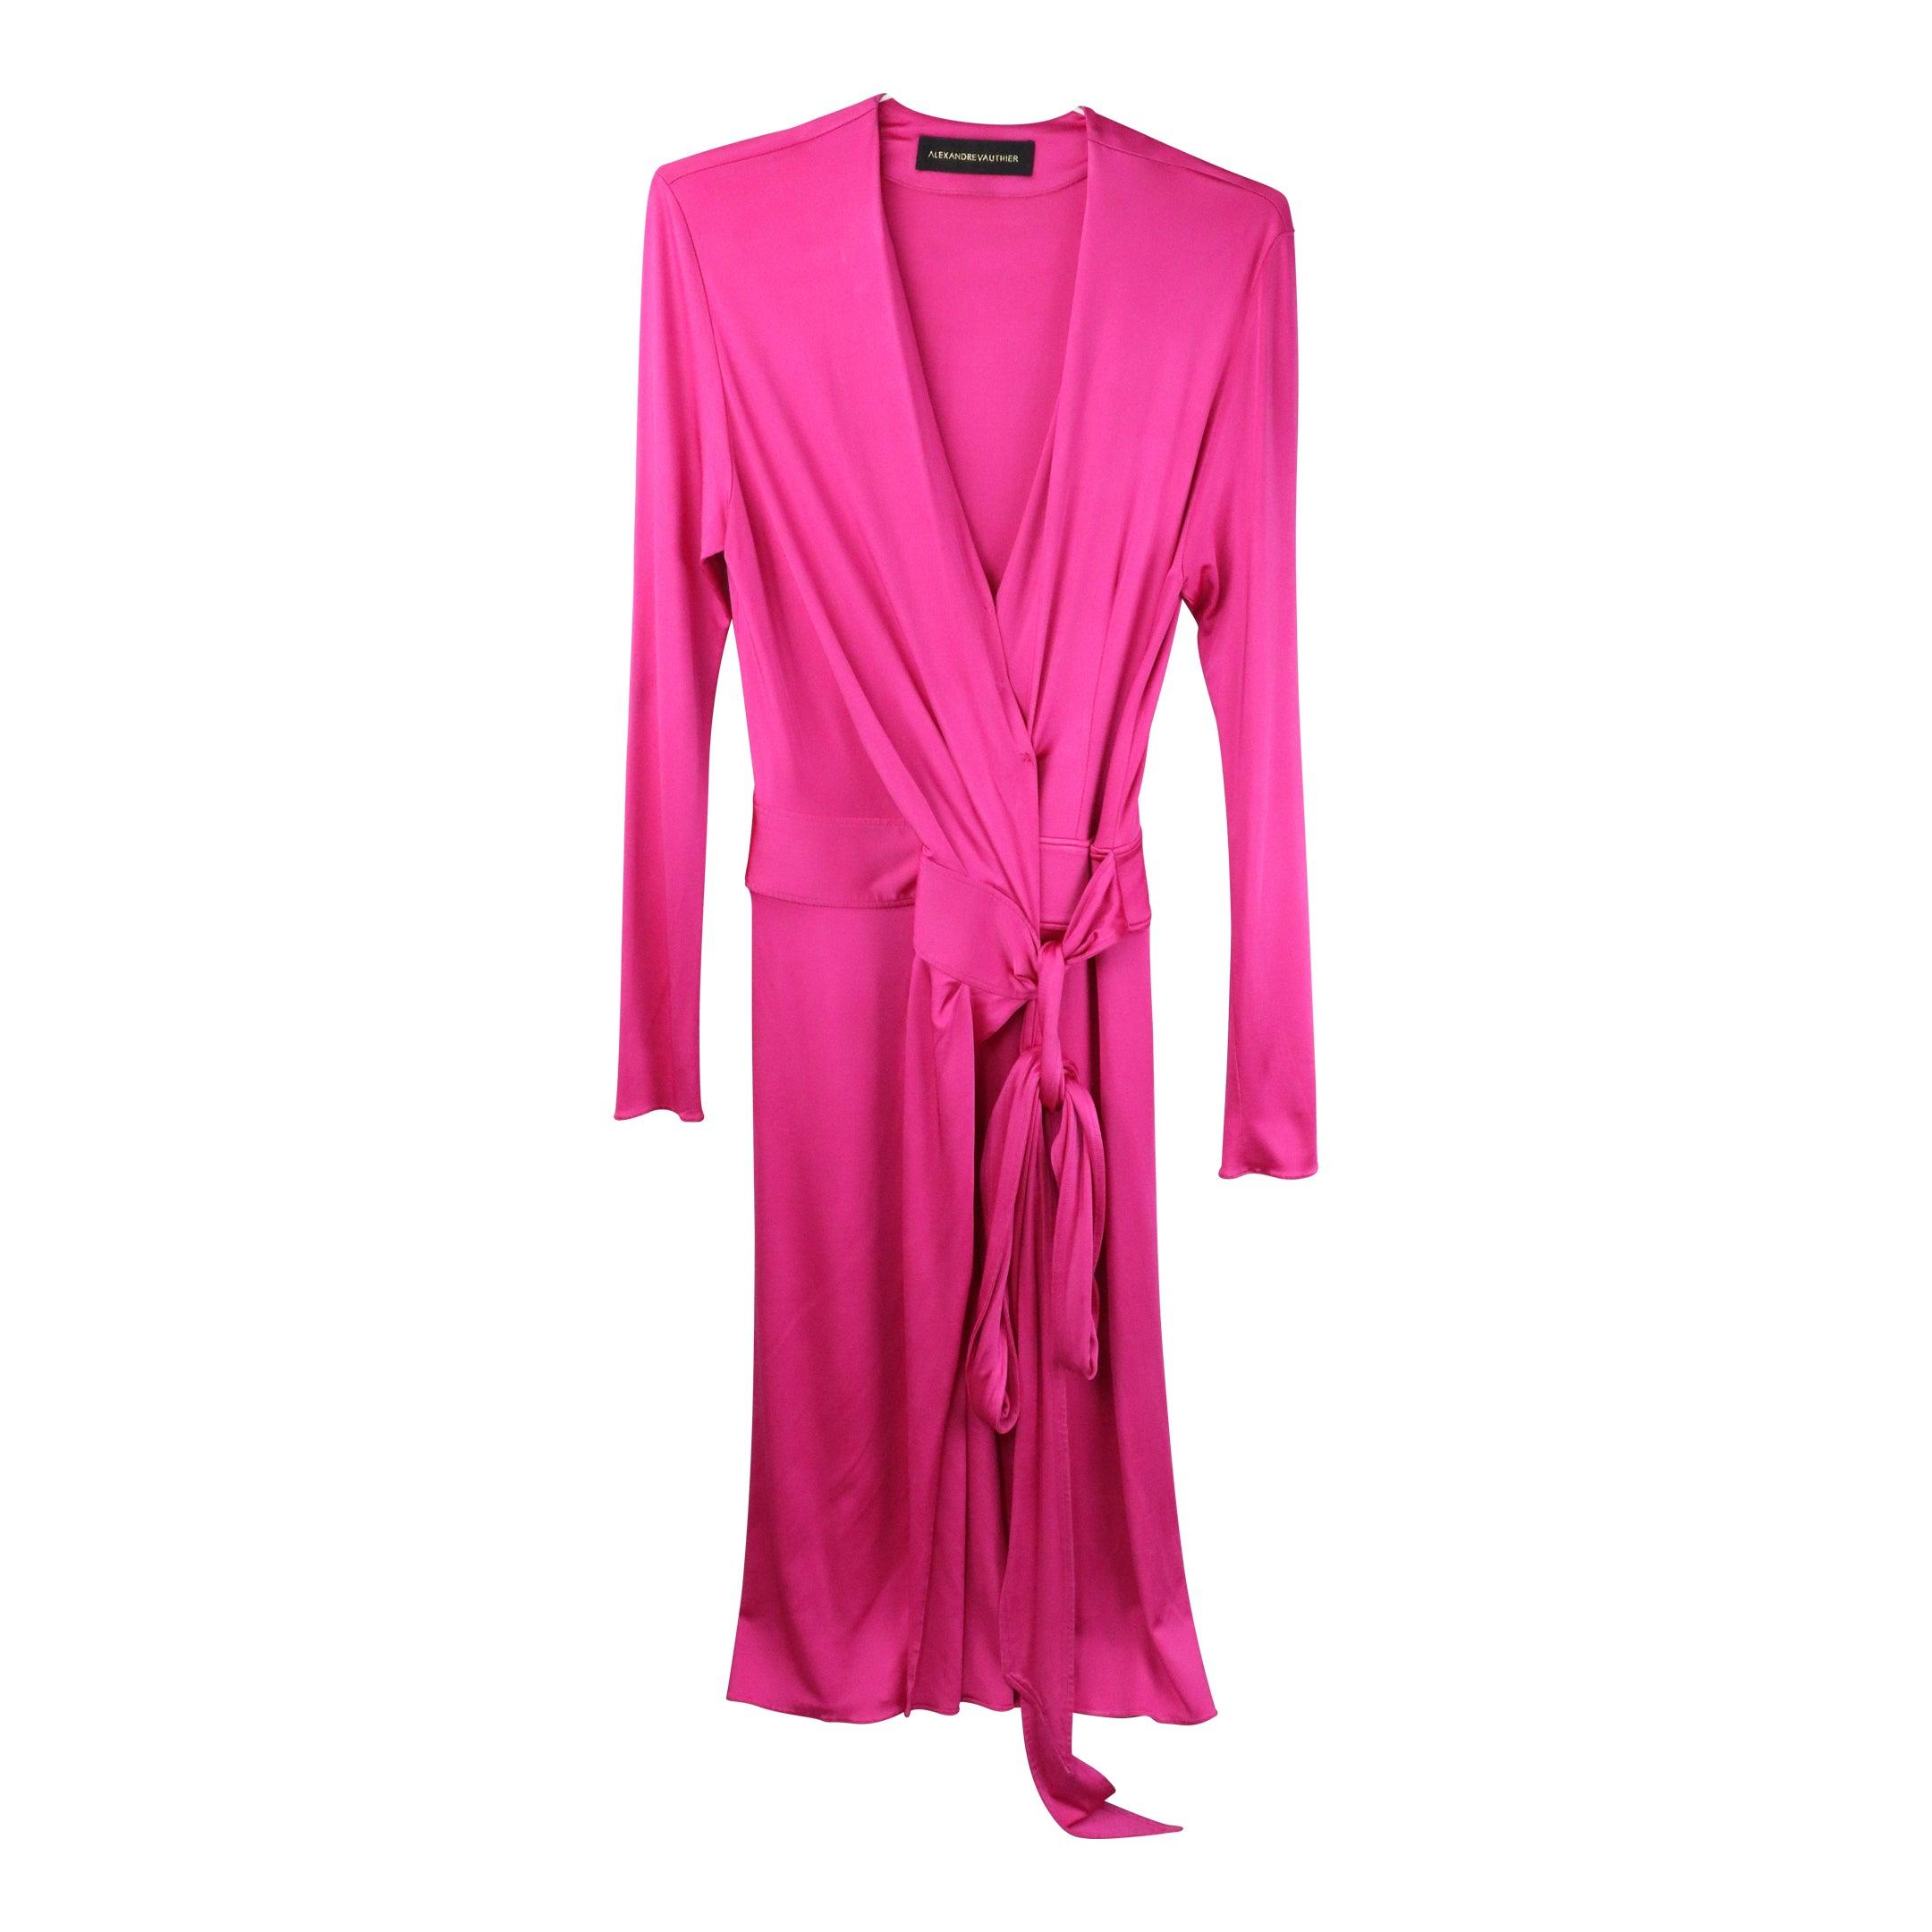 Alexandre Vauthier Dress - Women's 40 - Fashionably Yours